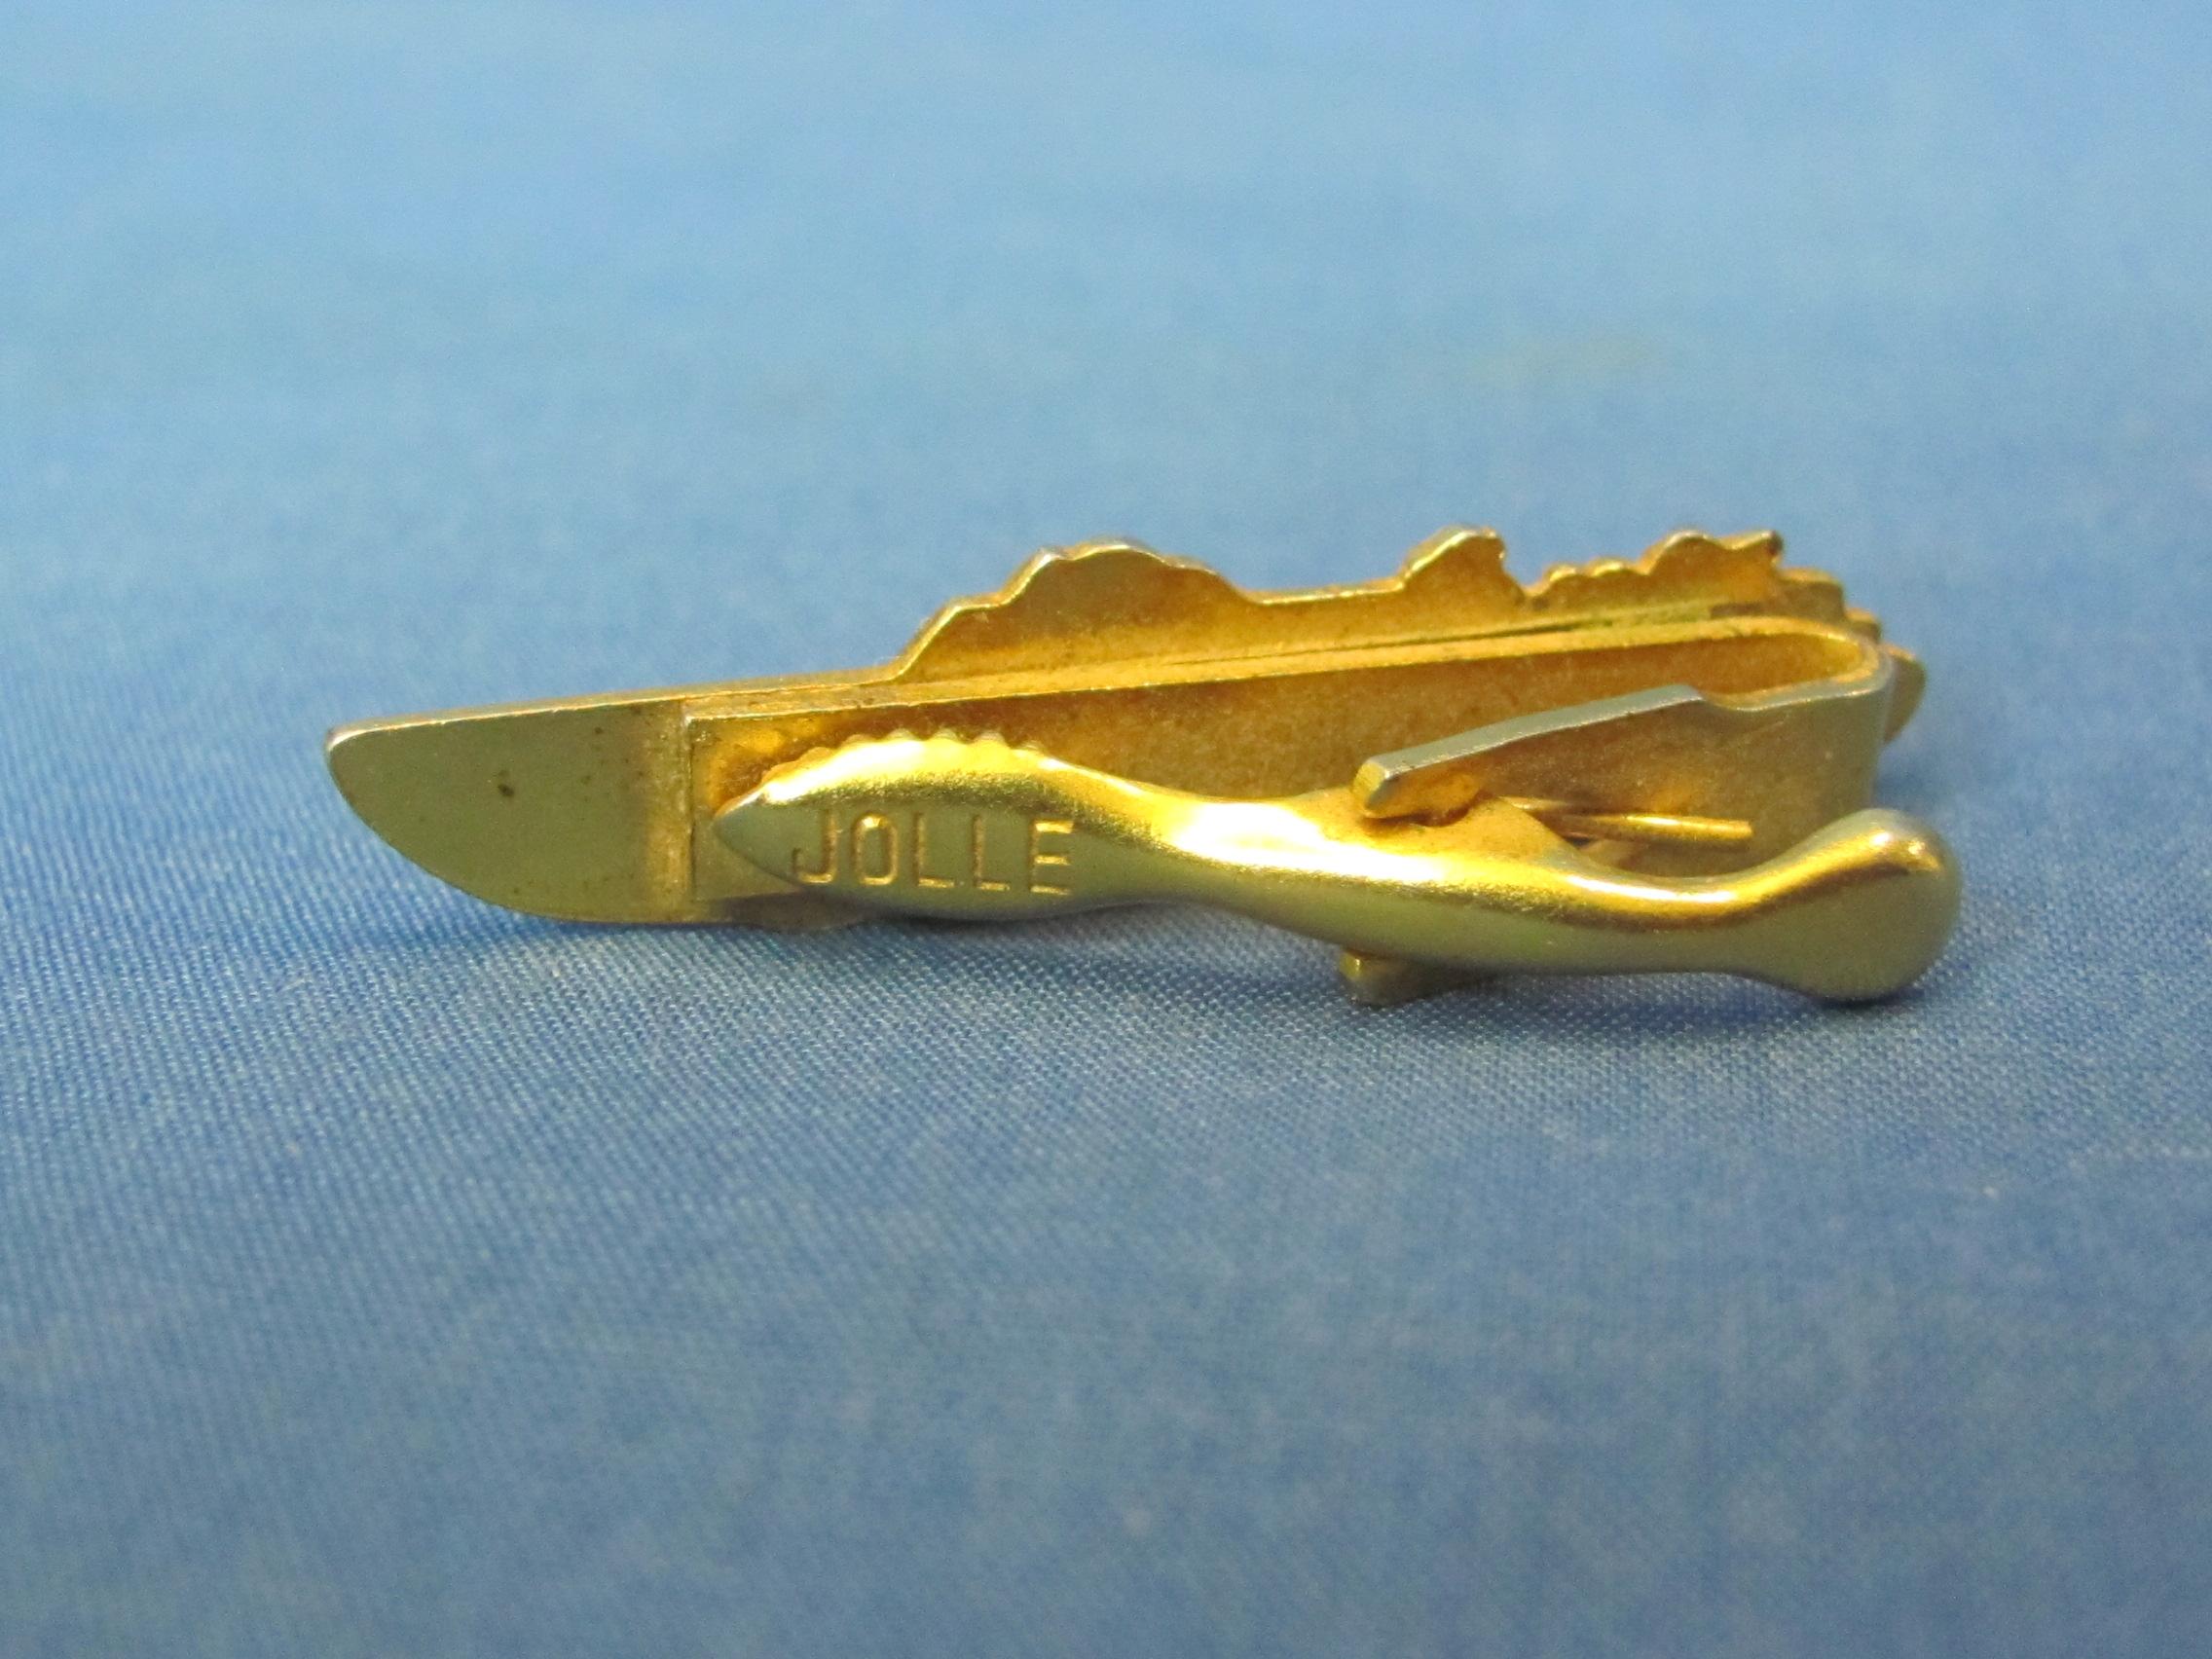 JFK Kennedy 60 Tie Clasp – Goldtone Figural PT Boat – 1 3/4” long – Good condition